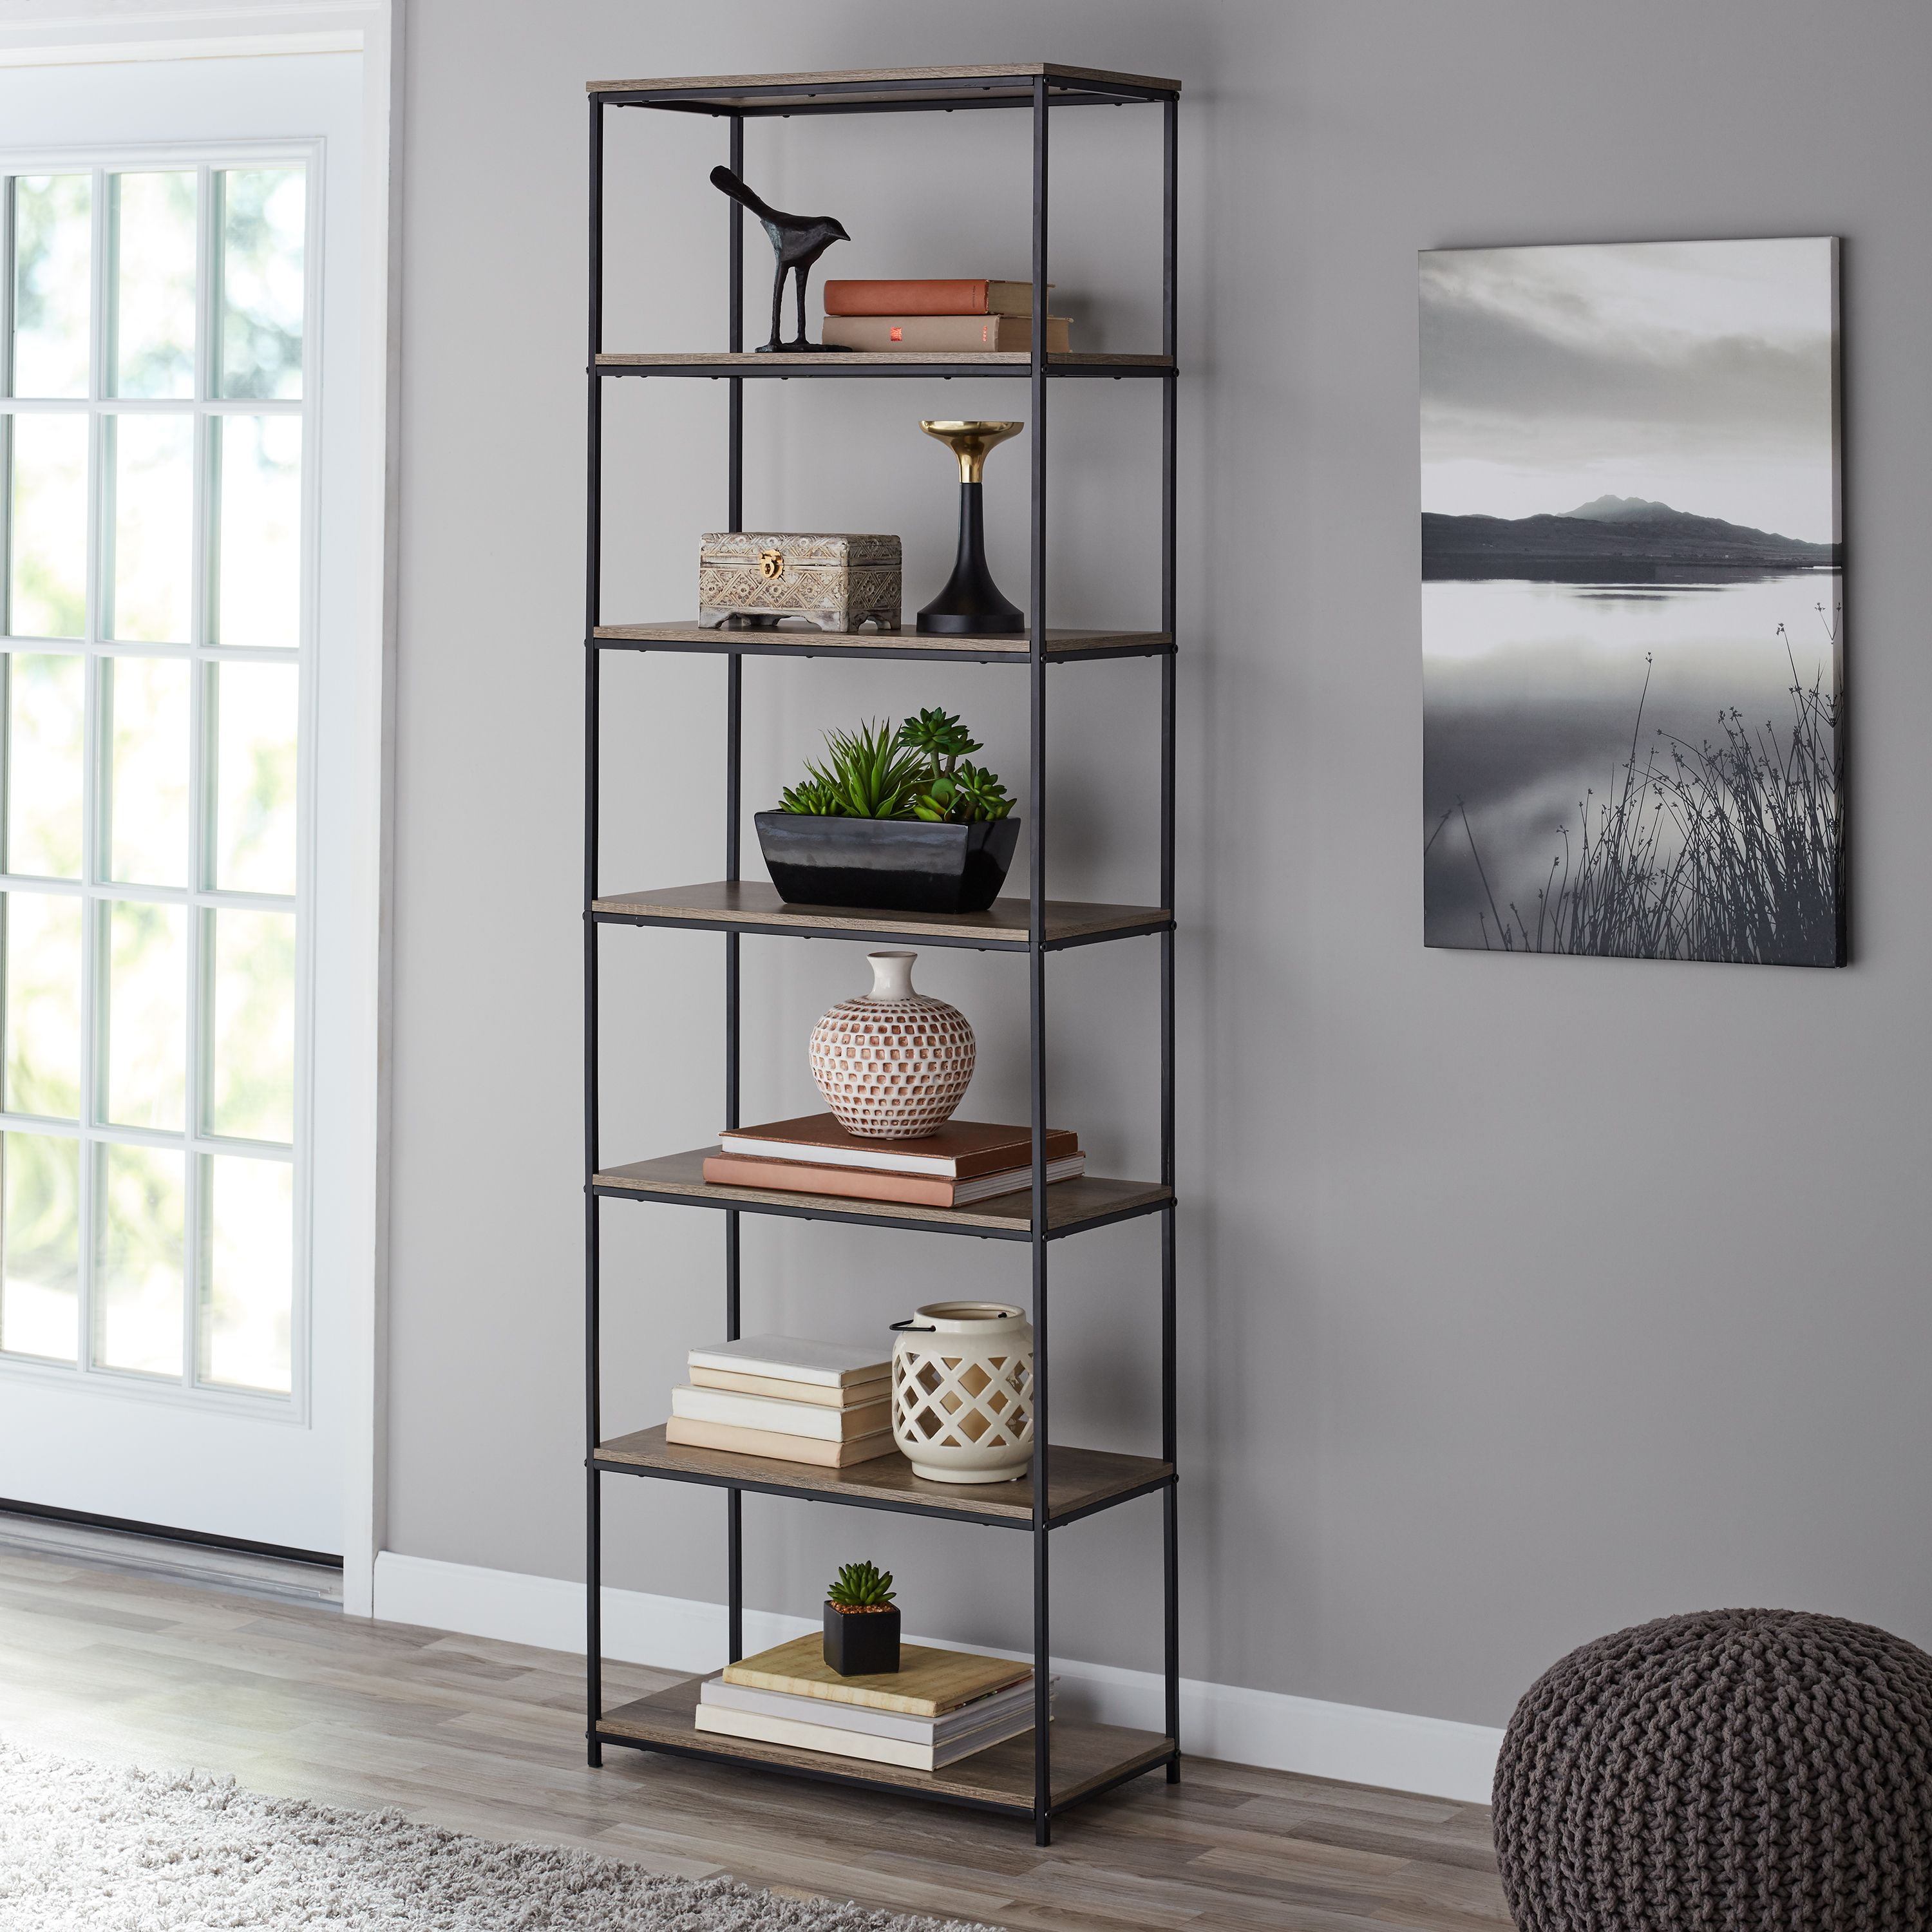 Details about   6 Tier Bookshelf Tall Bookcase Industrial Etagere Bookshelves w/ Metal Frame 